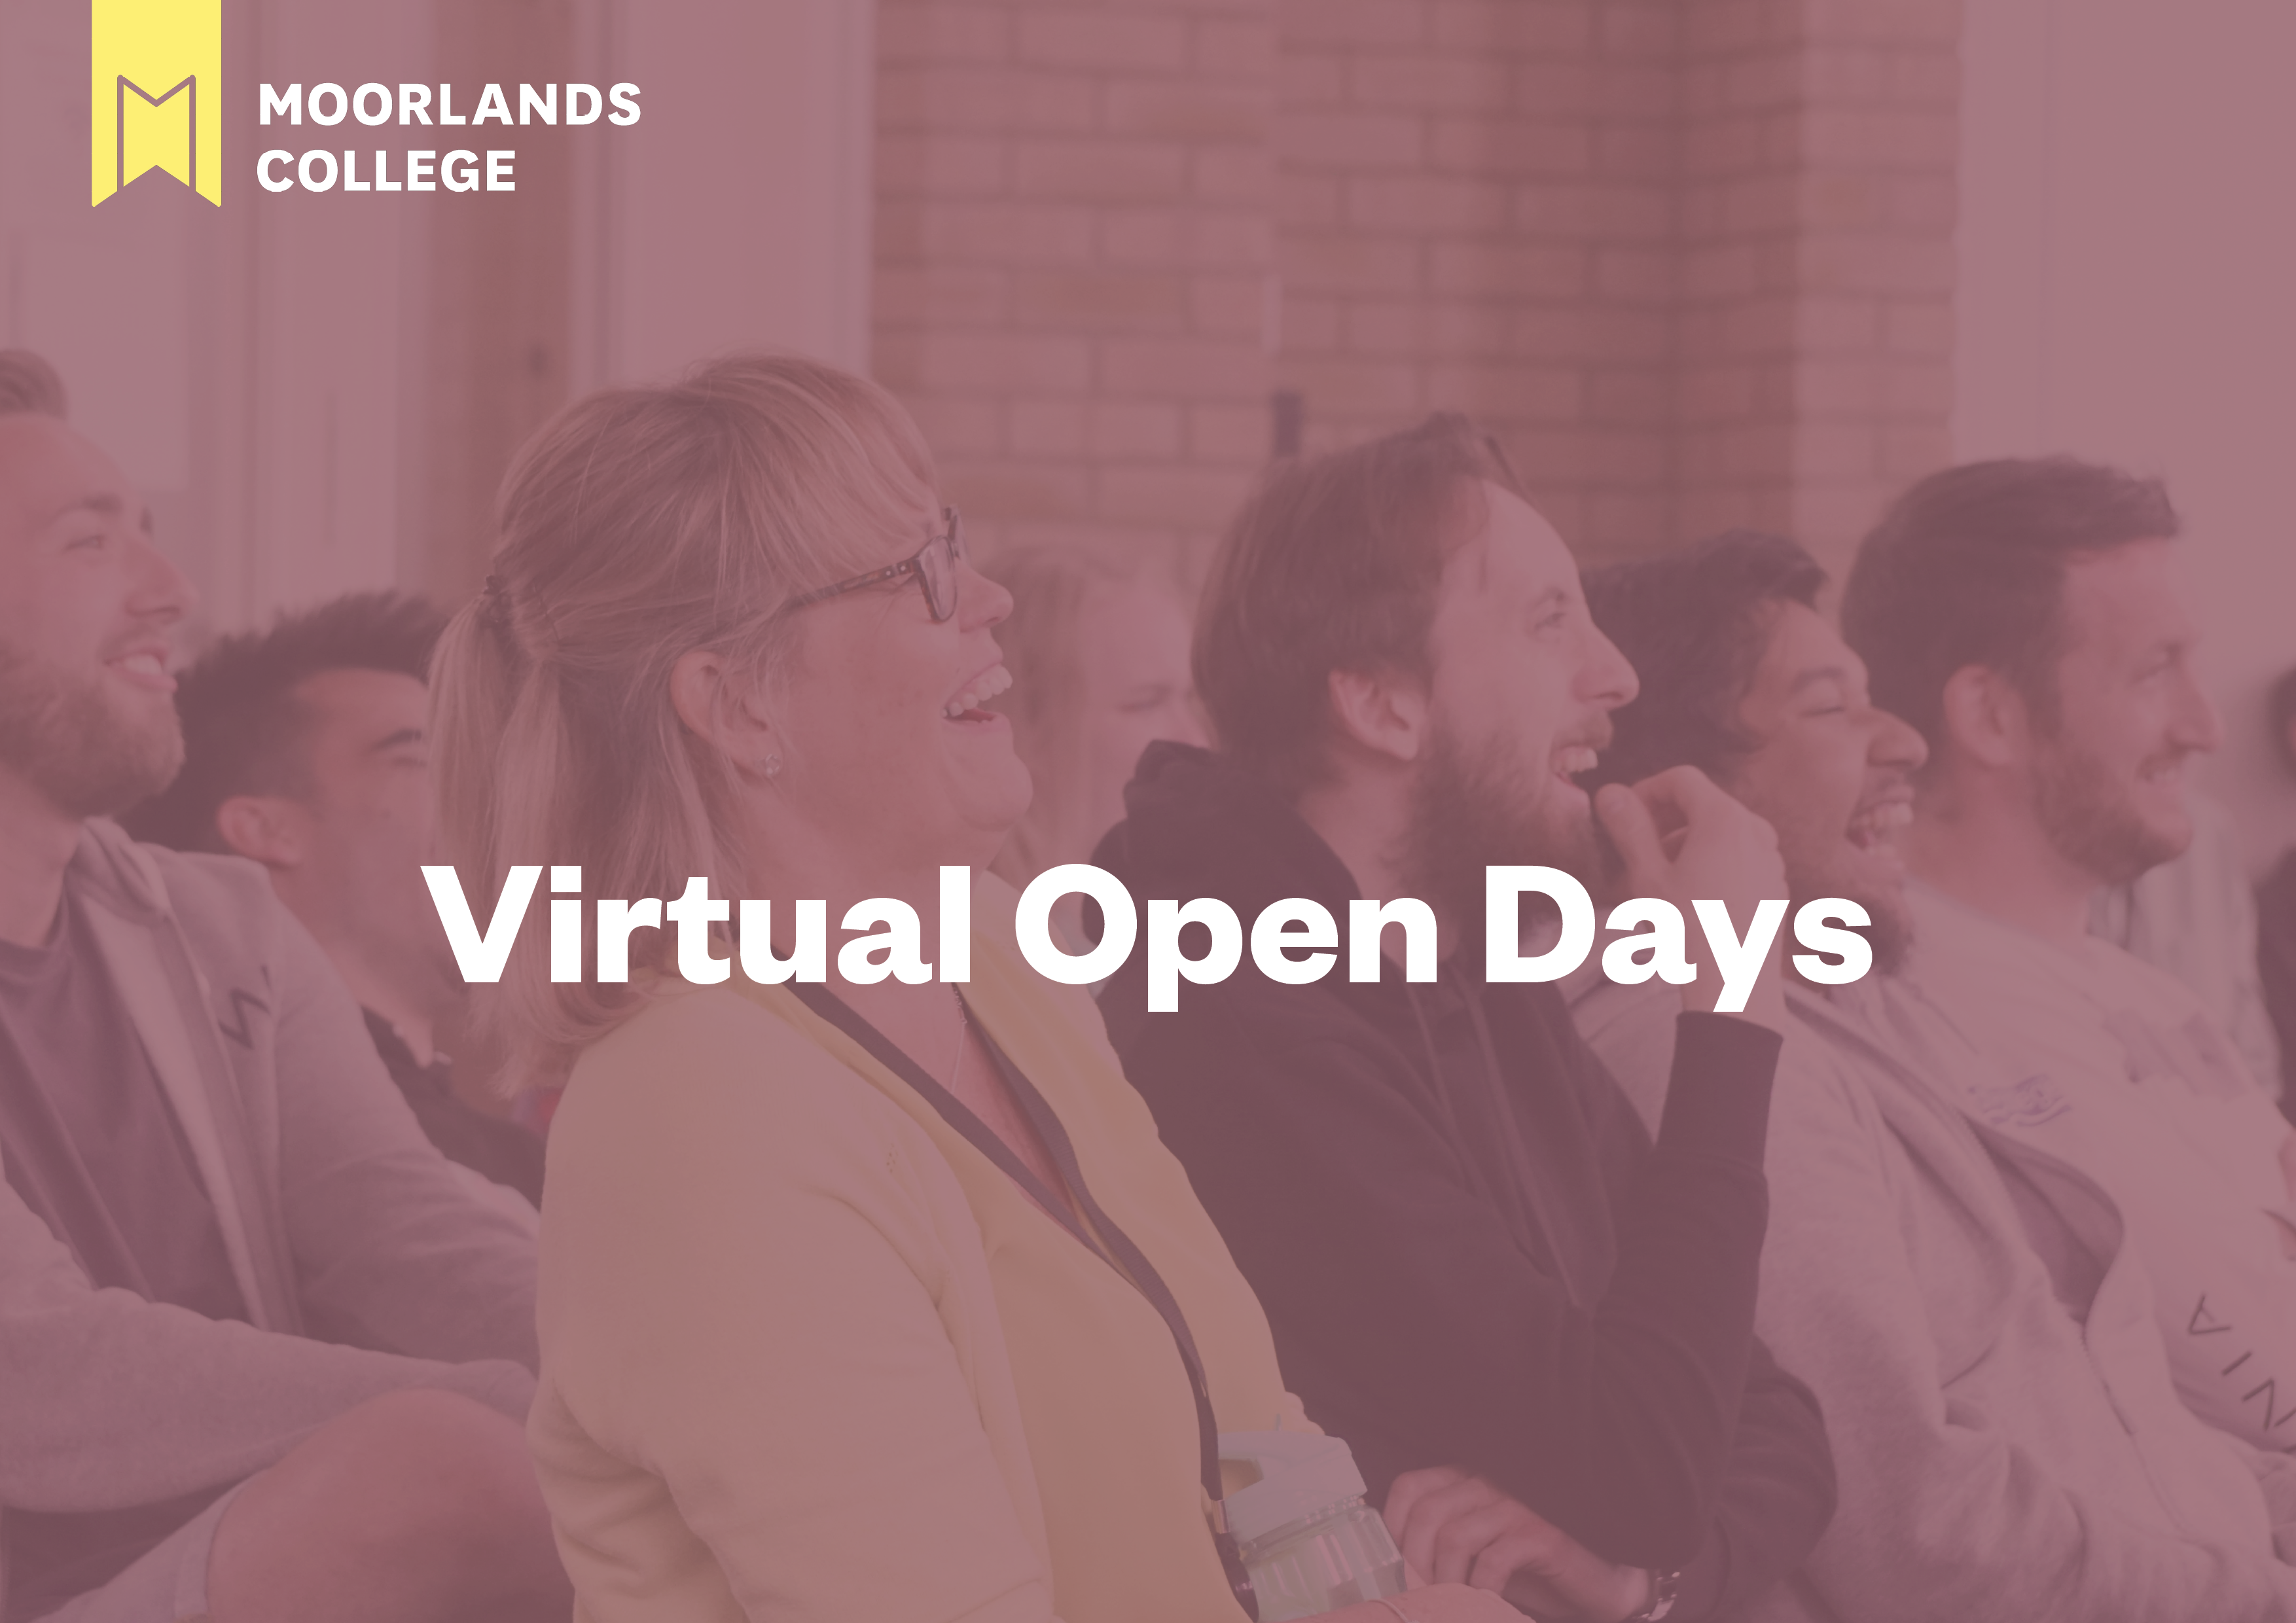 Join us for a Virtual Open Day